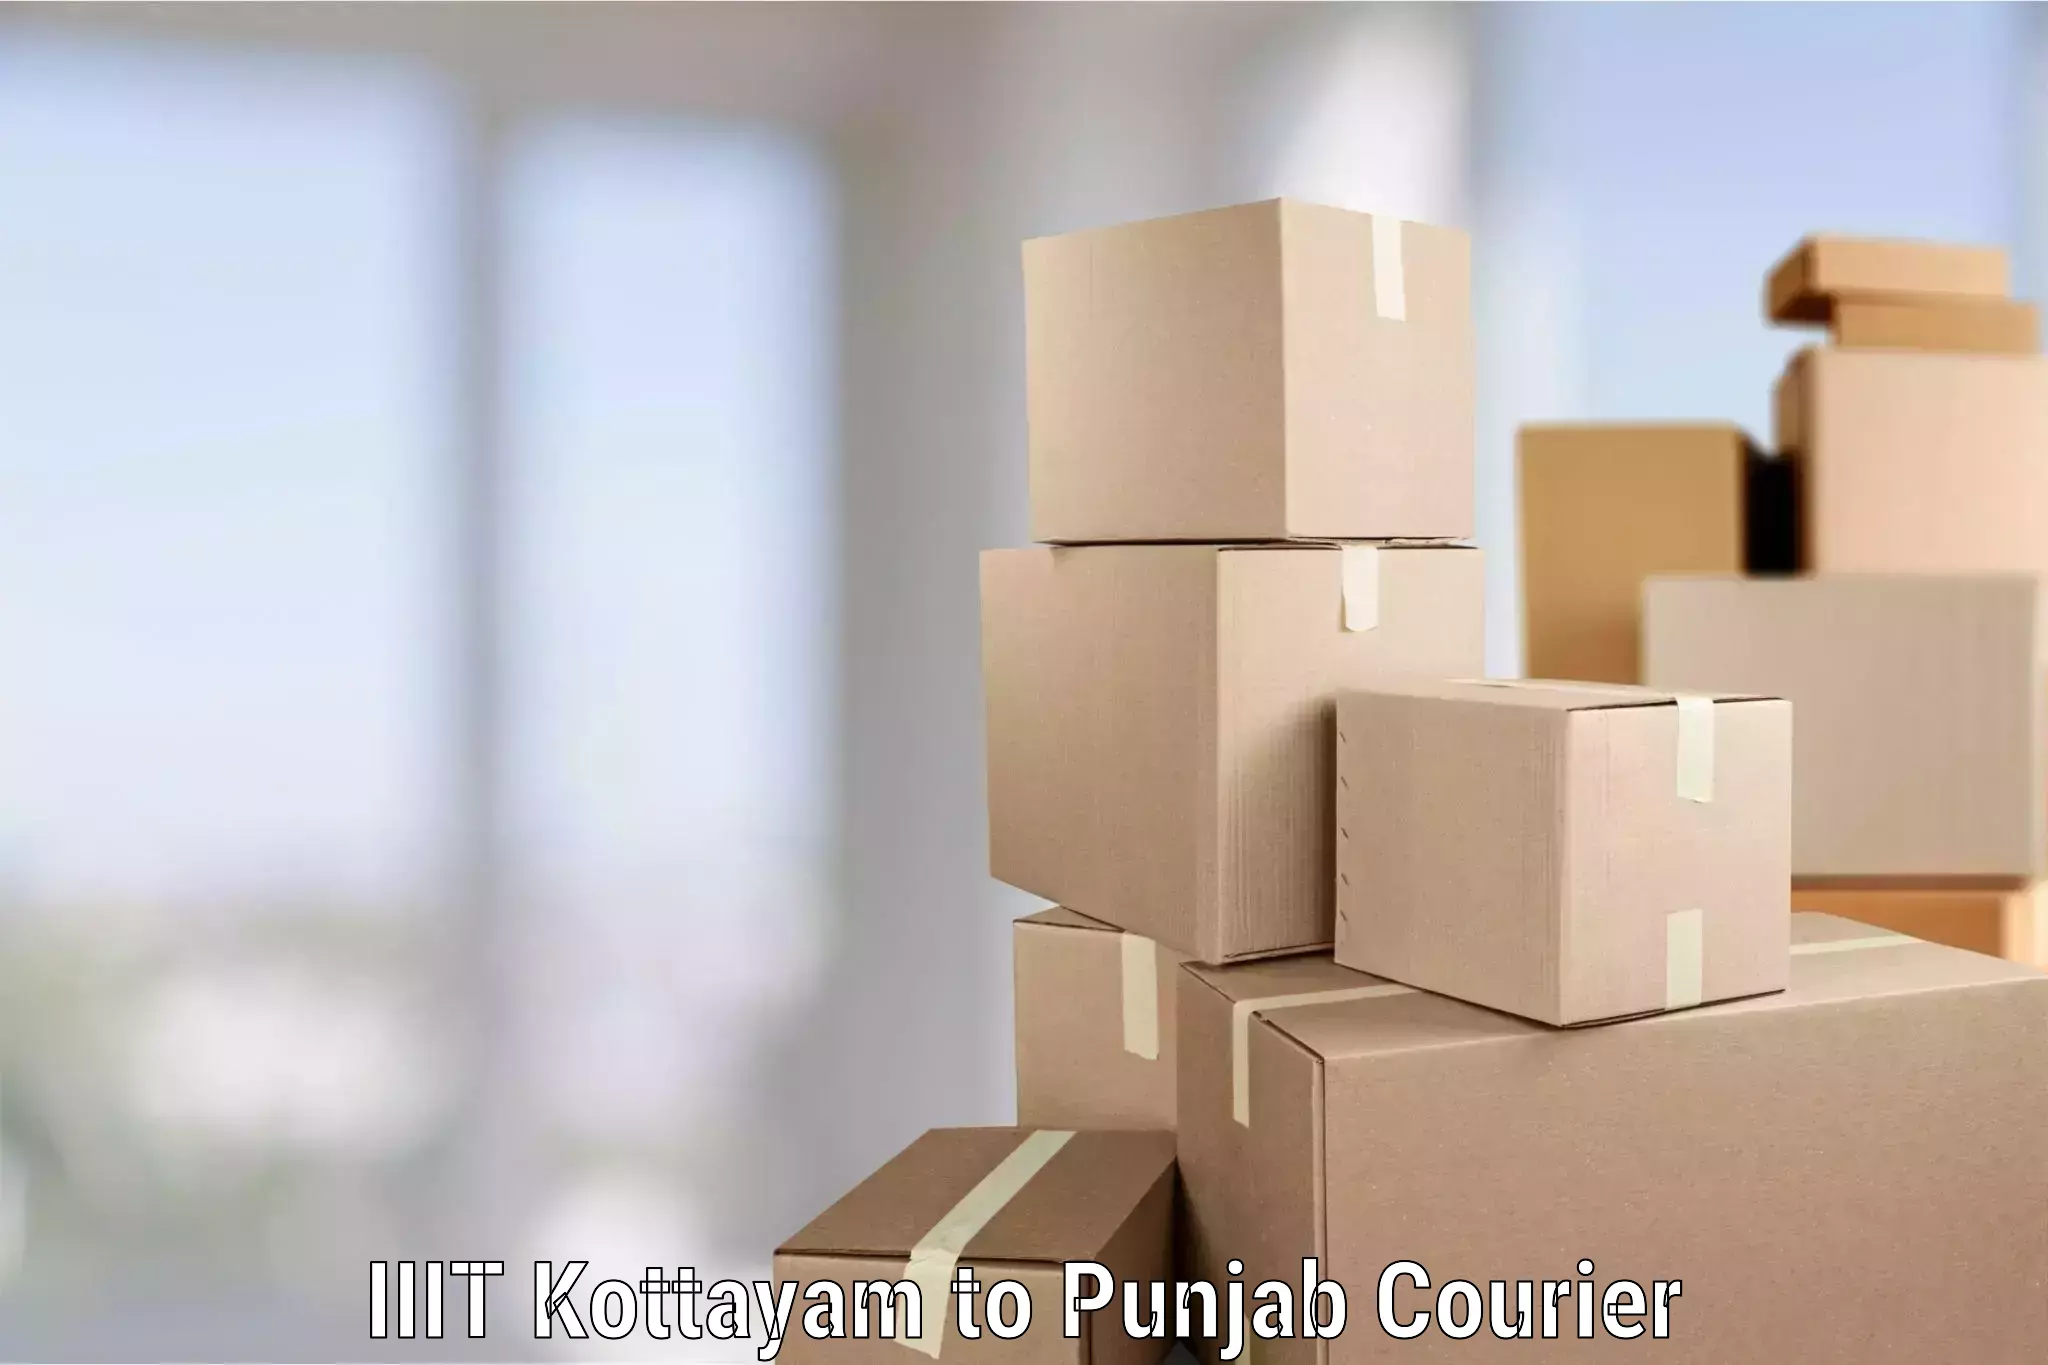 Professional movers and packers IIIT Kottayam to Firozpur